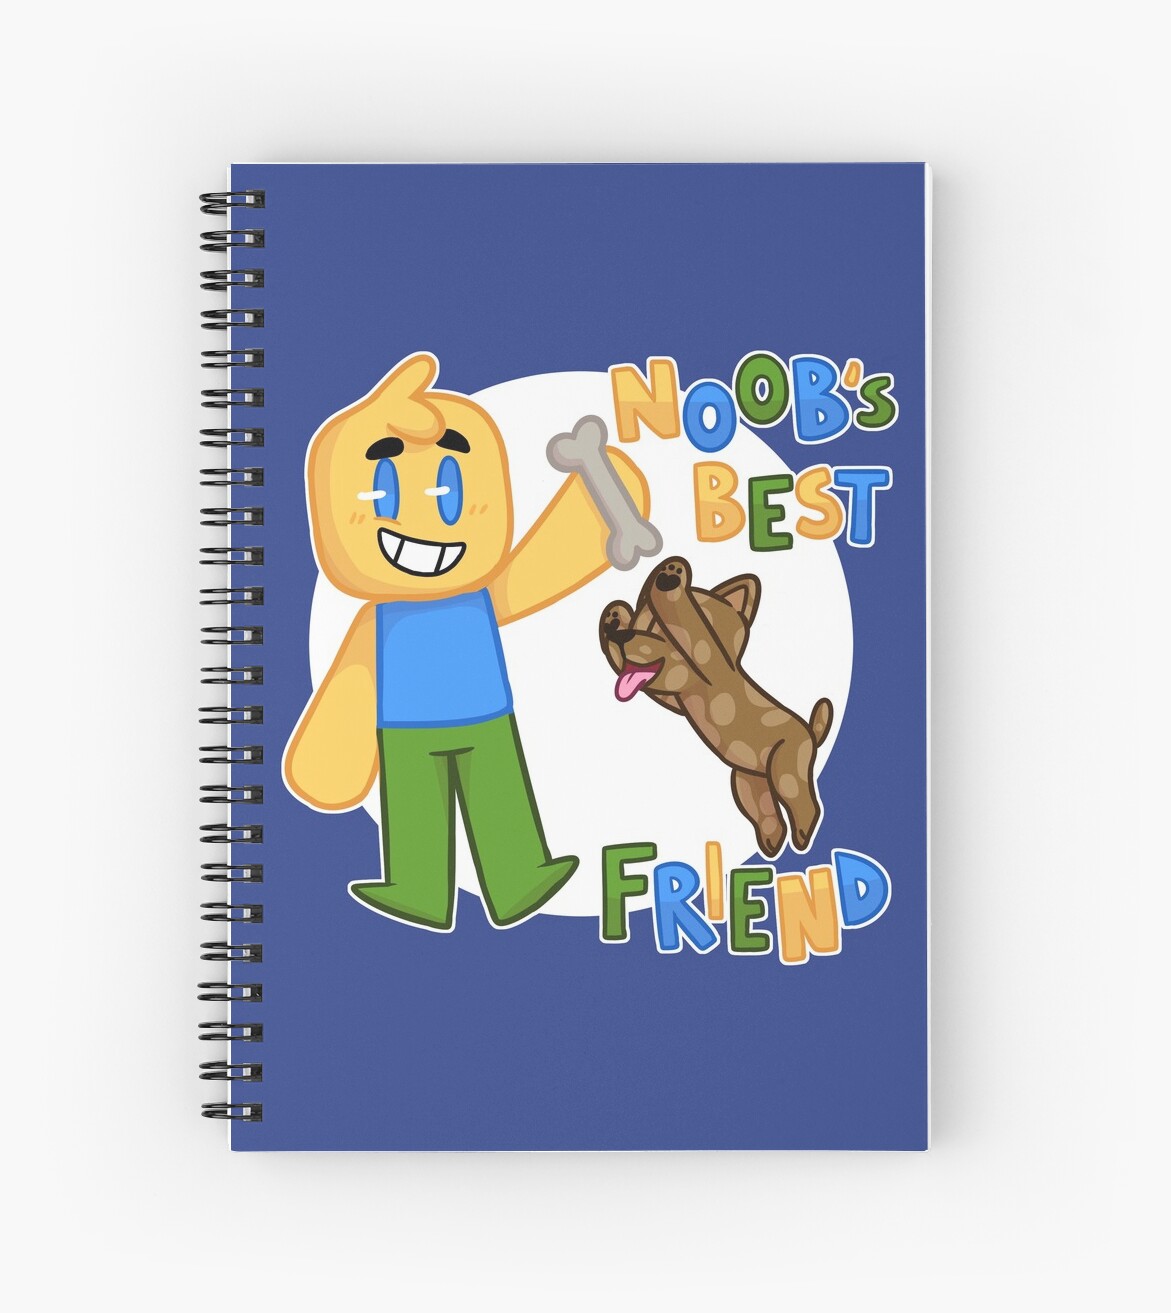 Noobs Best Friend Roblox Noob With Dog Roblox Inspired T Shirt Spiral Notebook By Smoothnoob - five nights at roblox 2016